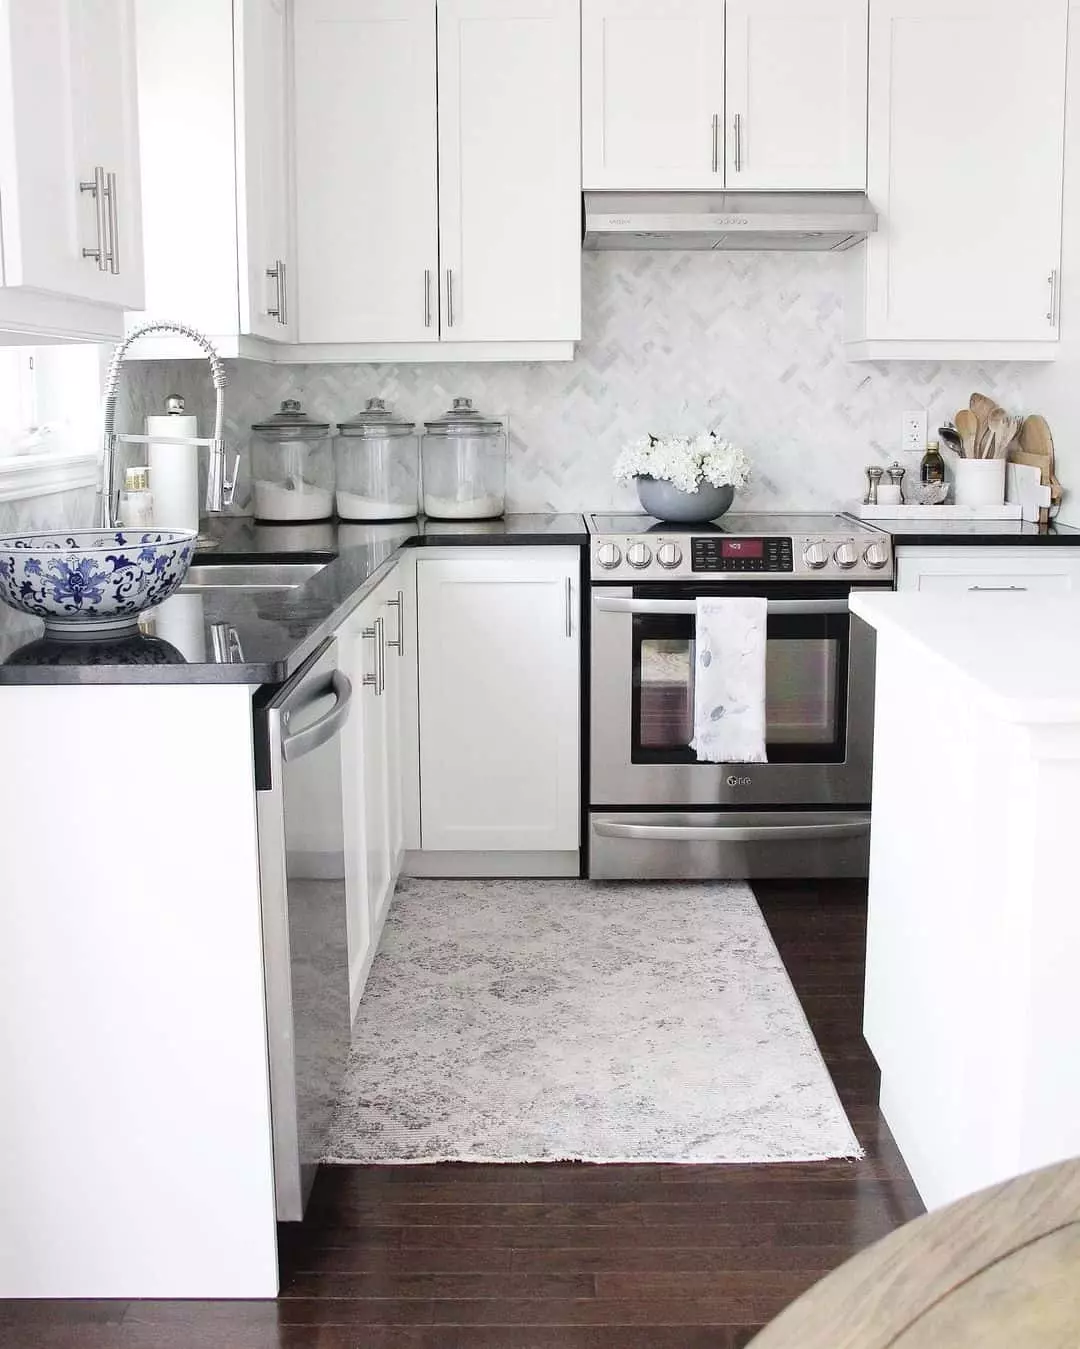 Nickel pulls add a touch of elegance to this L-shaped kitchen. A stainless steel range and range hood are fitted between the shaker cabinets in front of a white and gray herringbone tile backsplash.